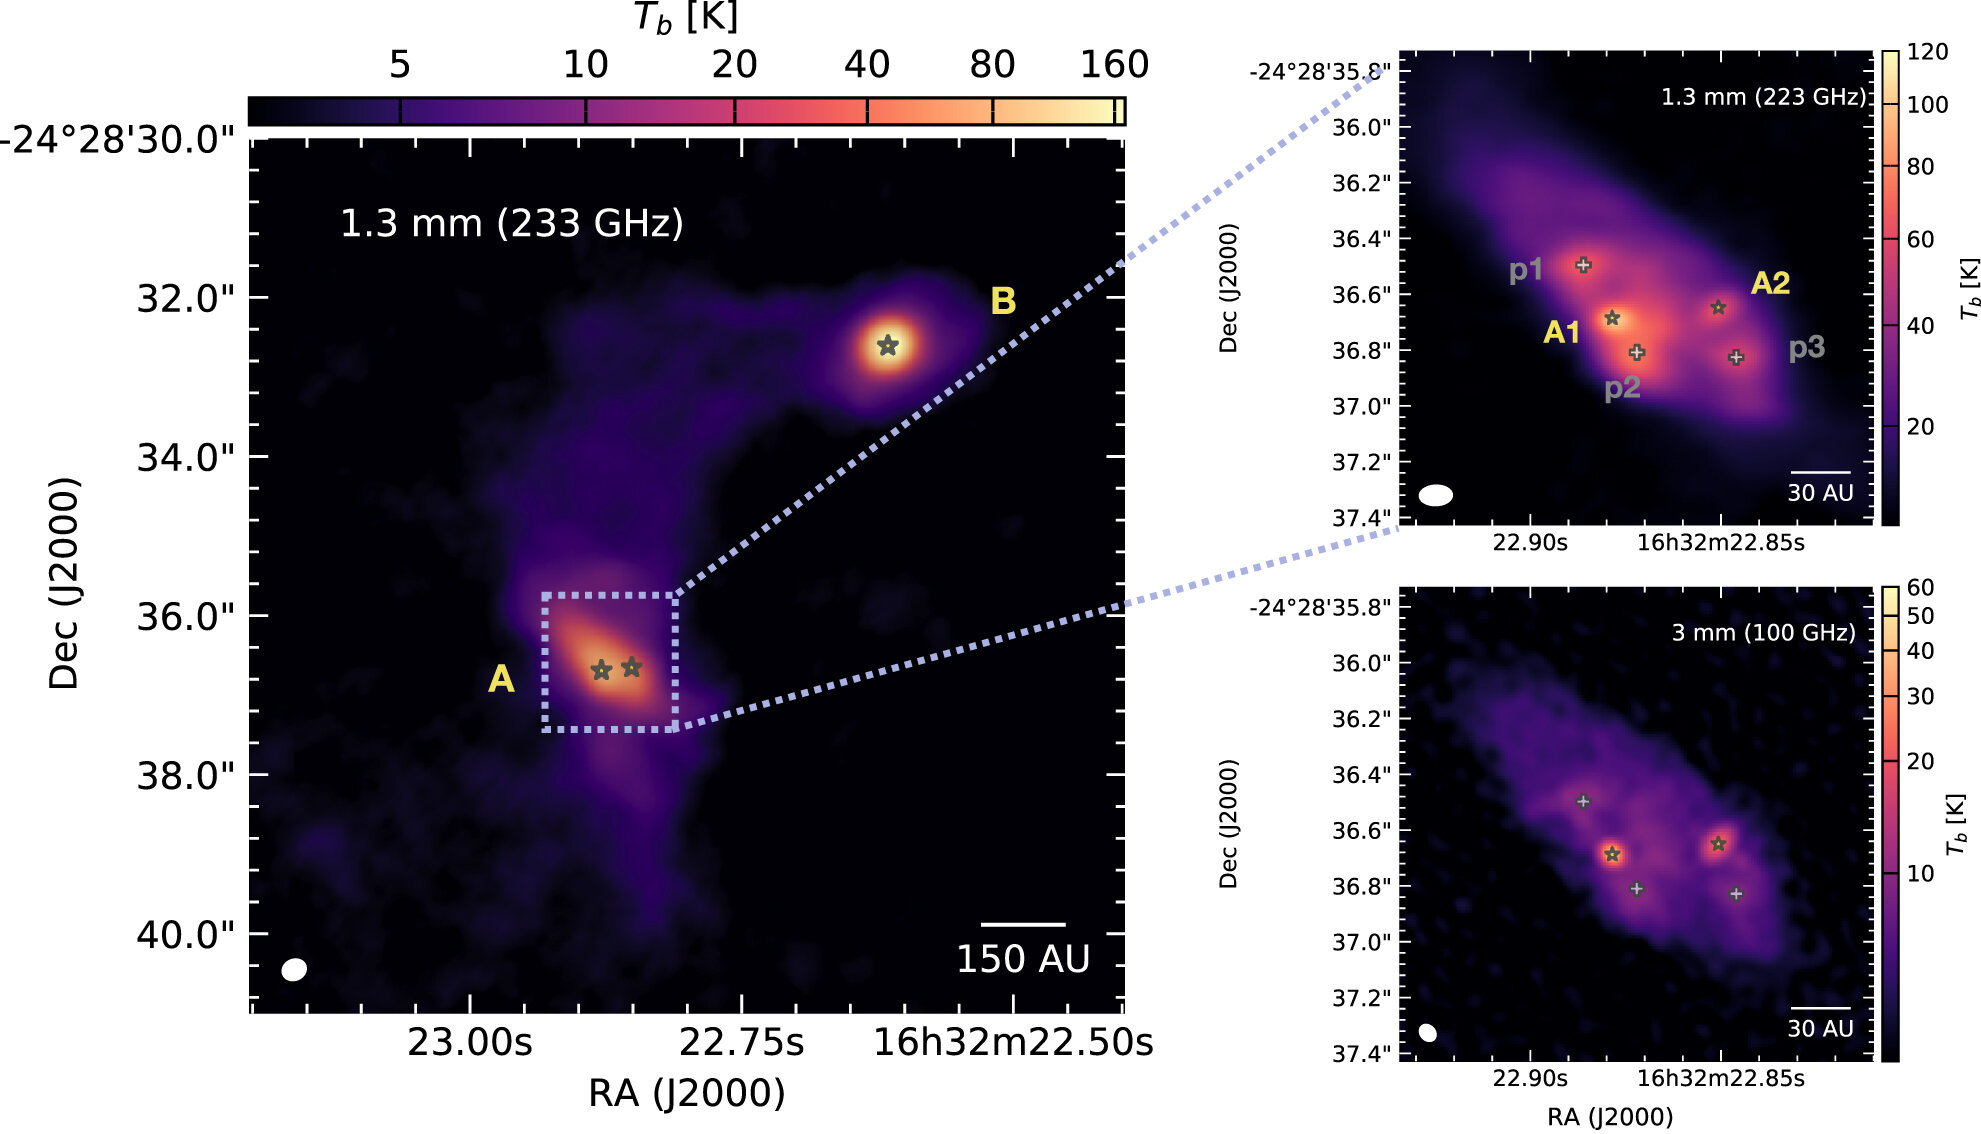 Action of two protostars appears to be making conditions right for planet format..